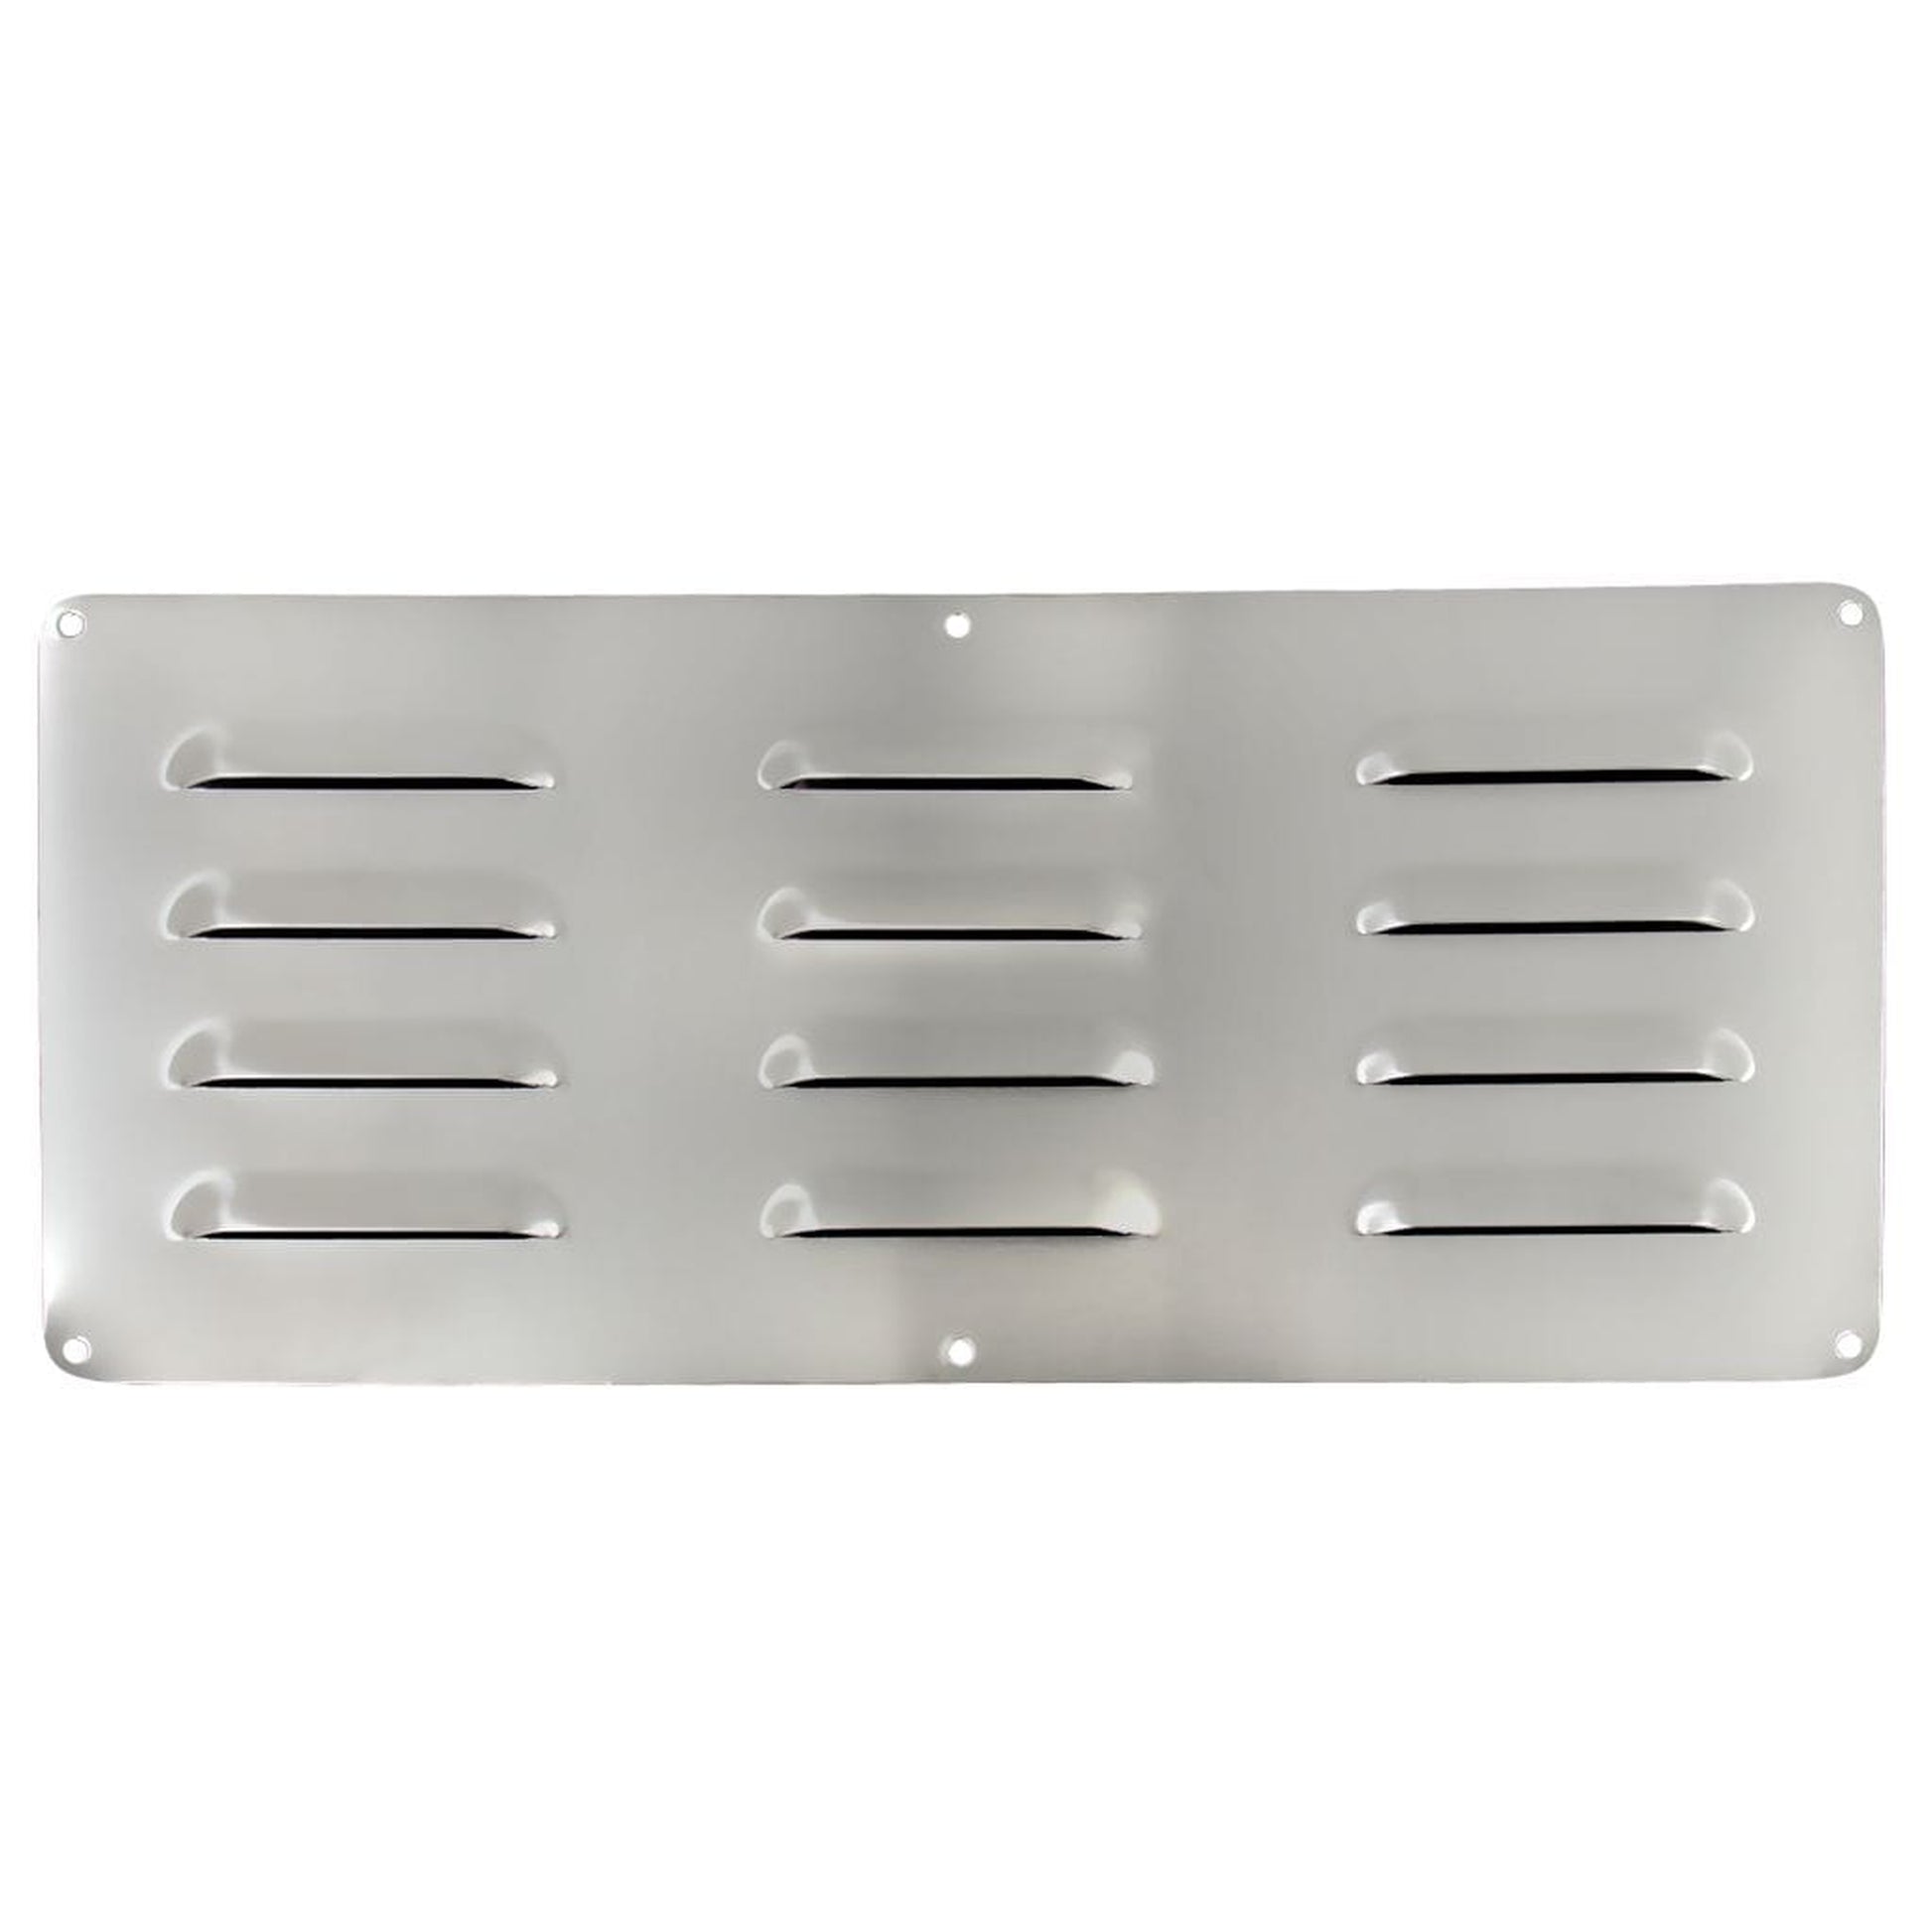 Blaze Stainless Steel Island Vent Panel, 6x14-inches